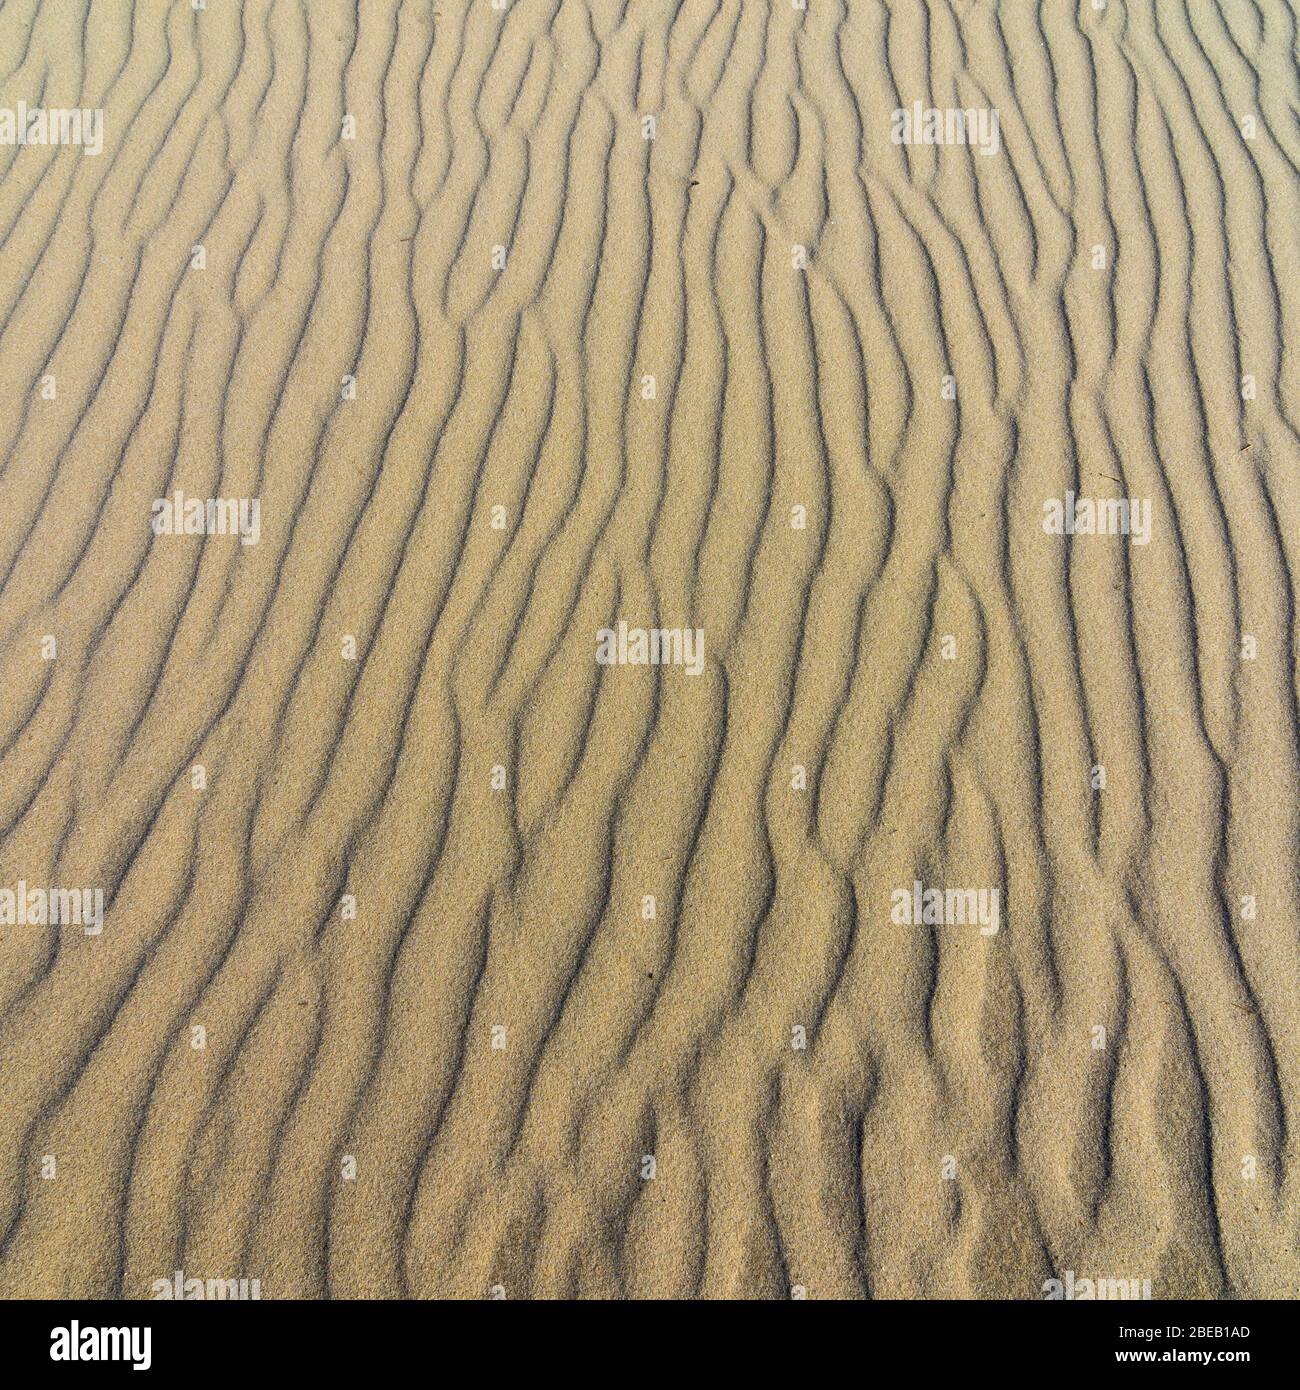 Wavy contours in the sand. The sea has shaped the beach into lines through the waves. Stock Photo